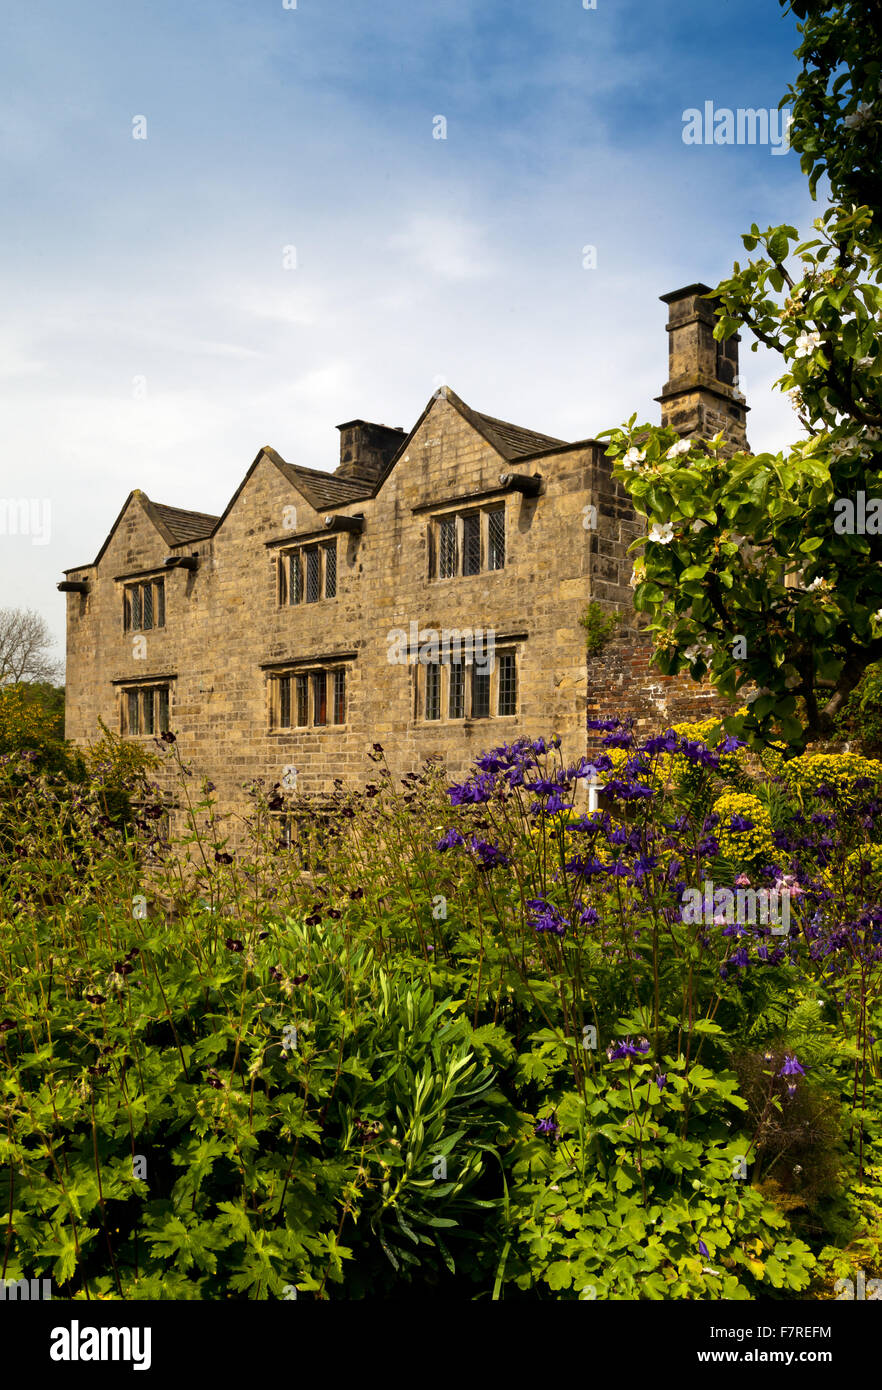 The garden at the front of Eyam Hall and Craft Centre, Derbyshire. Eyam Hall is an unspoilt example of a gritstone Jacobean manor house, set within a walled garden. Stock Photo